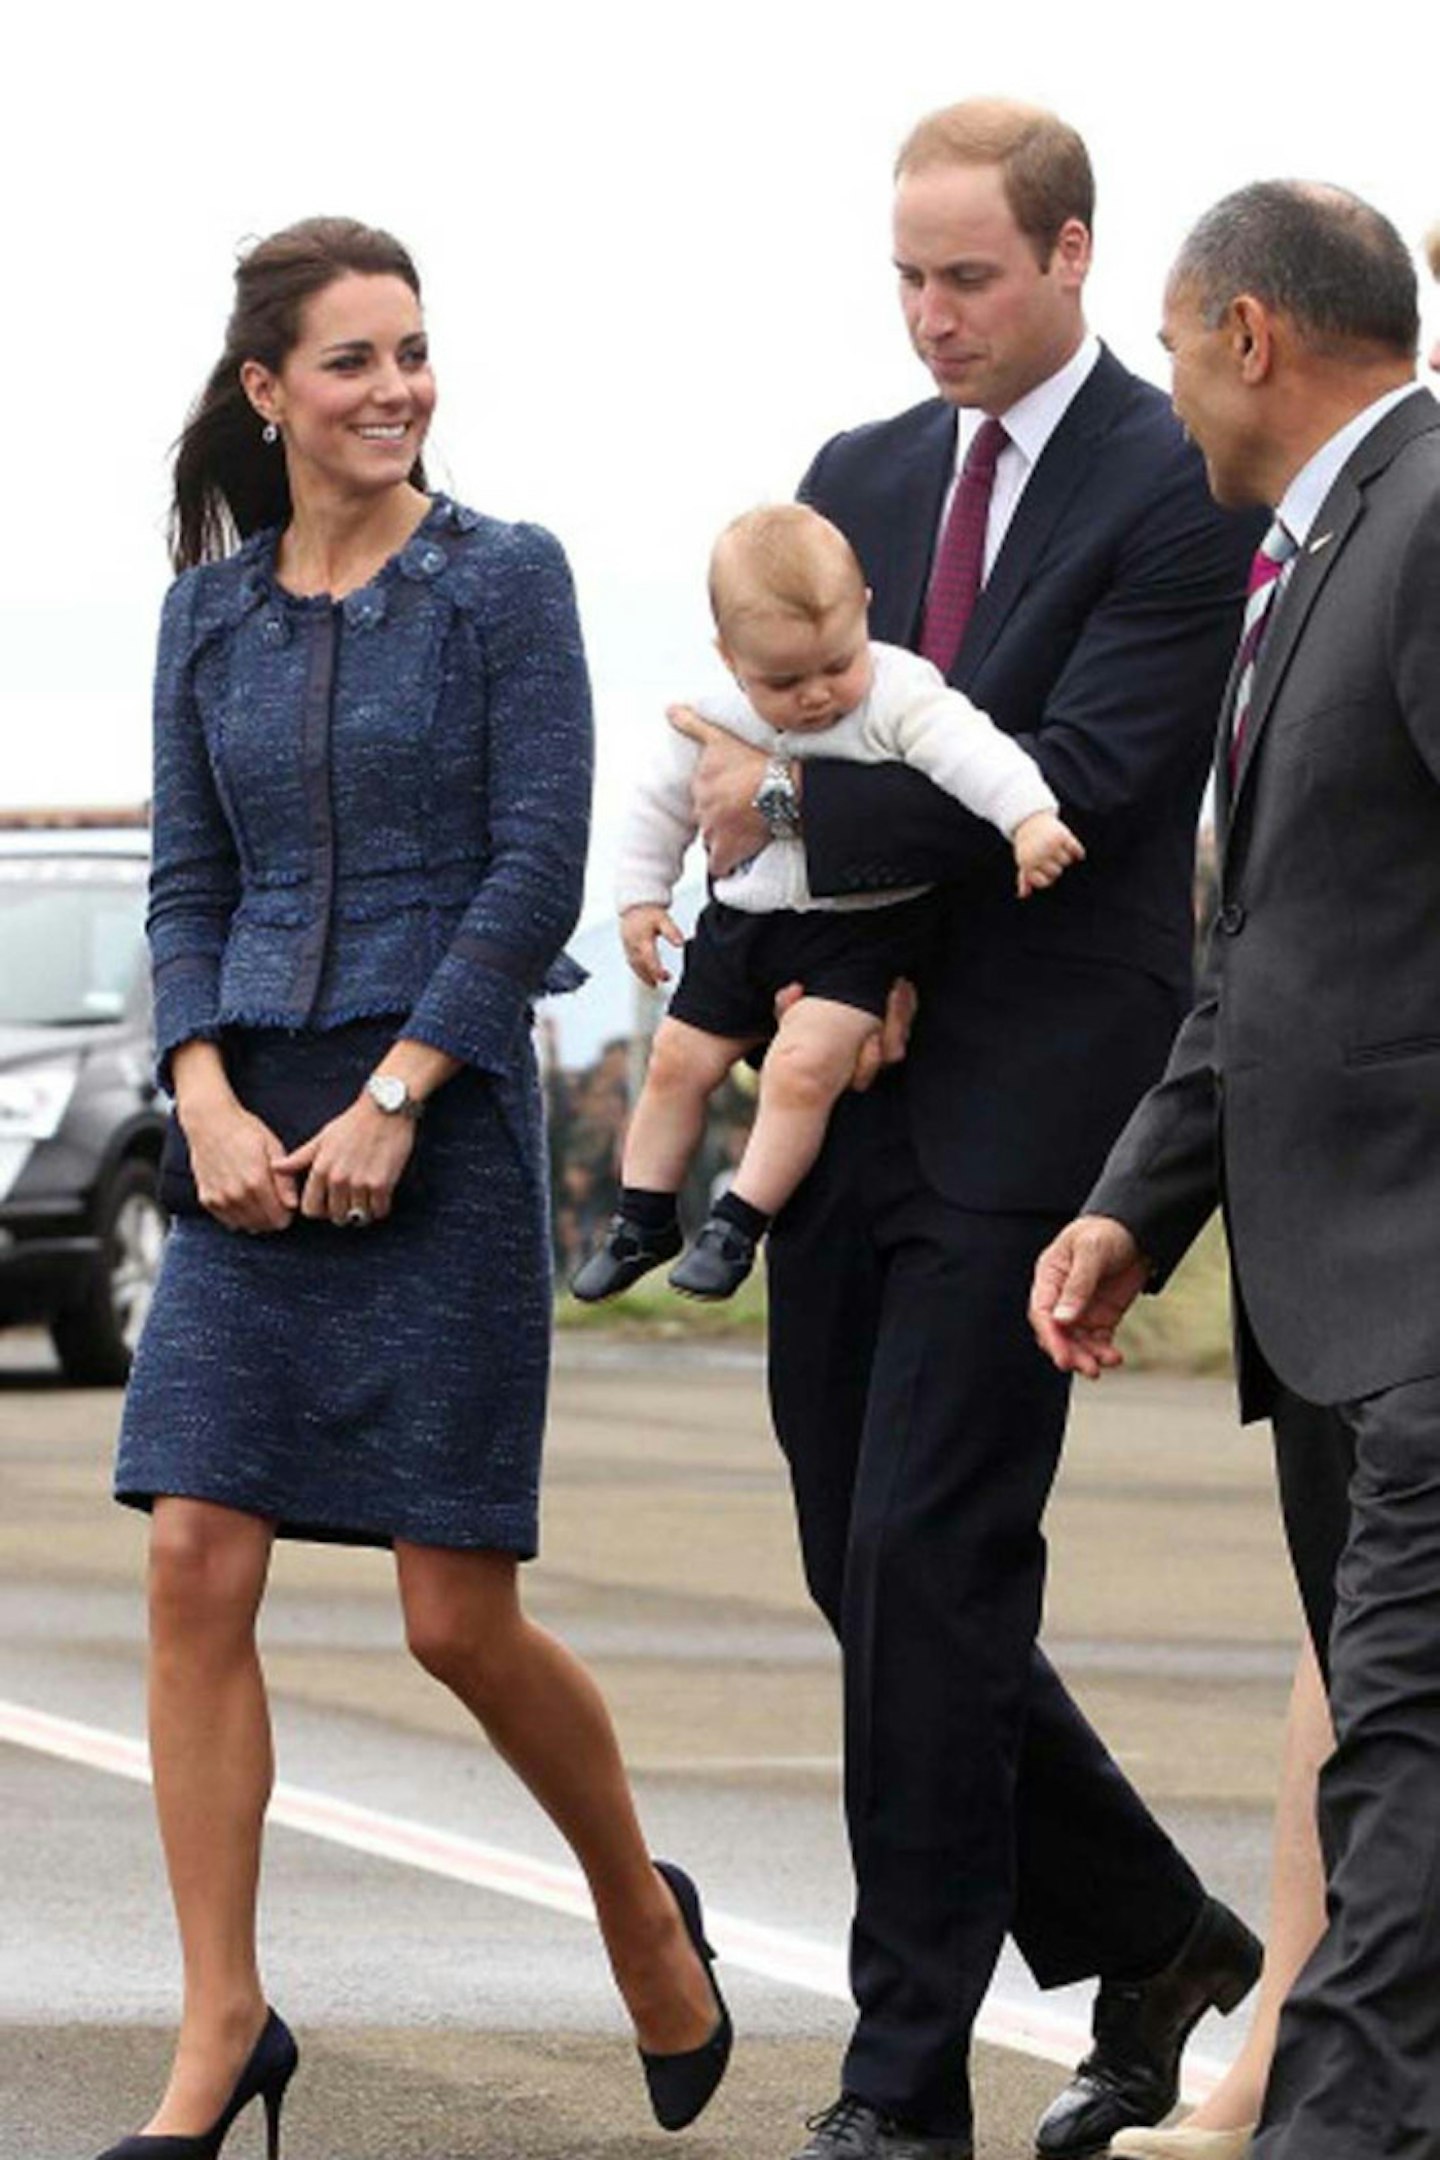 The Duchess of Cambridge wears Rebecca Taylor leaving New Zealand, 16 April 2014